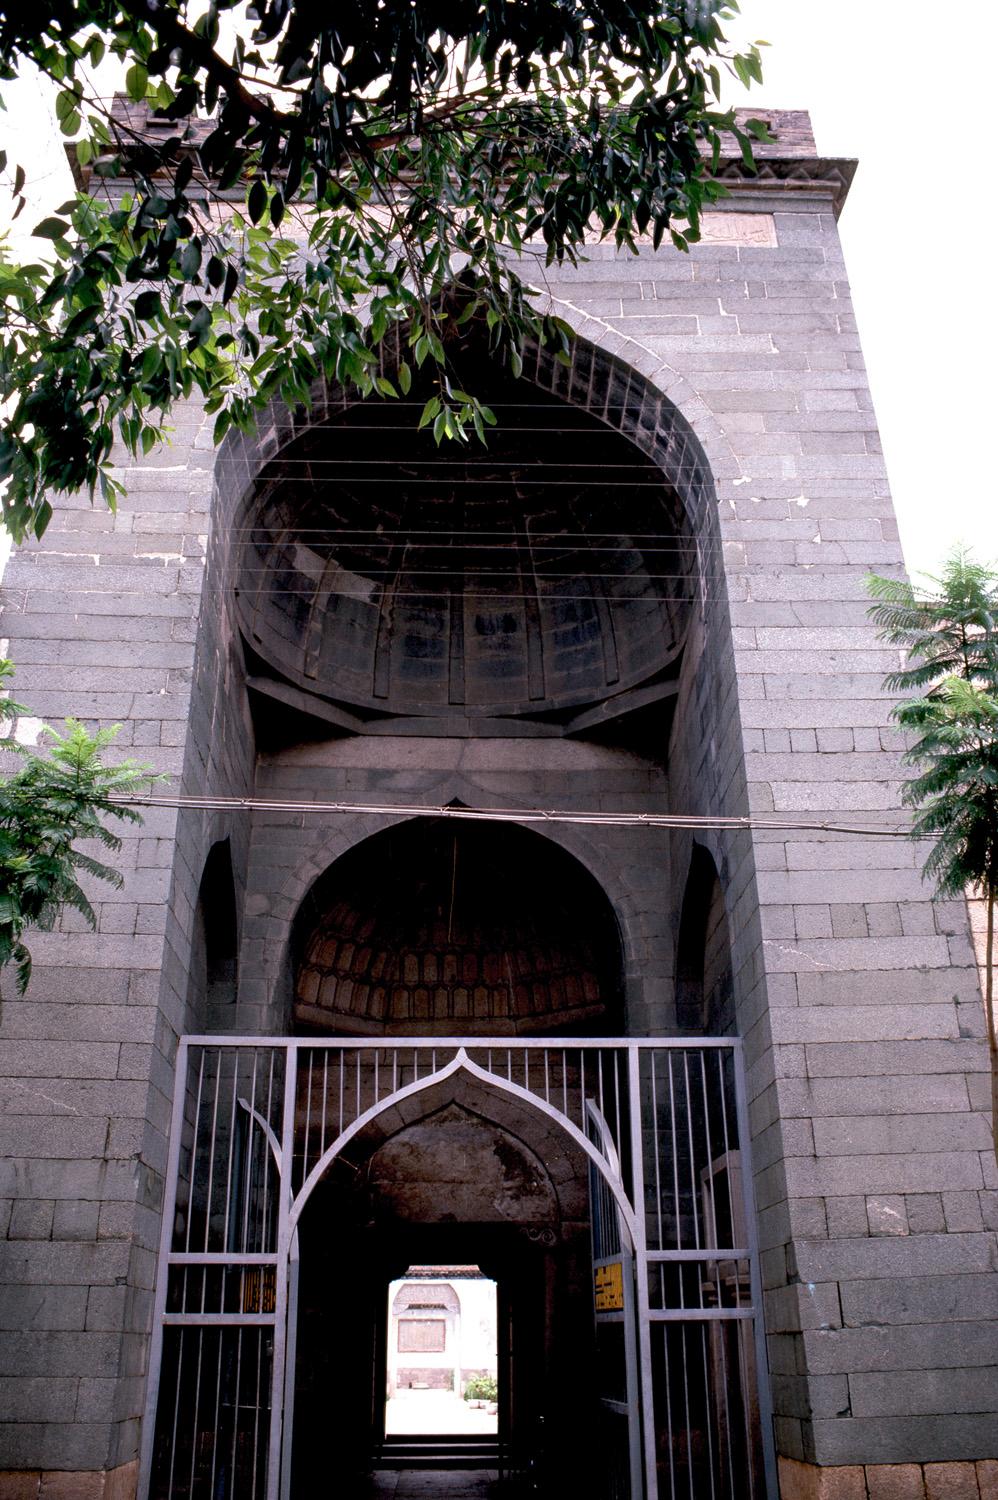 View of the three nestled niches of the entry portal